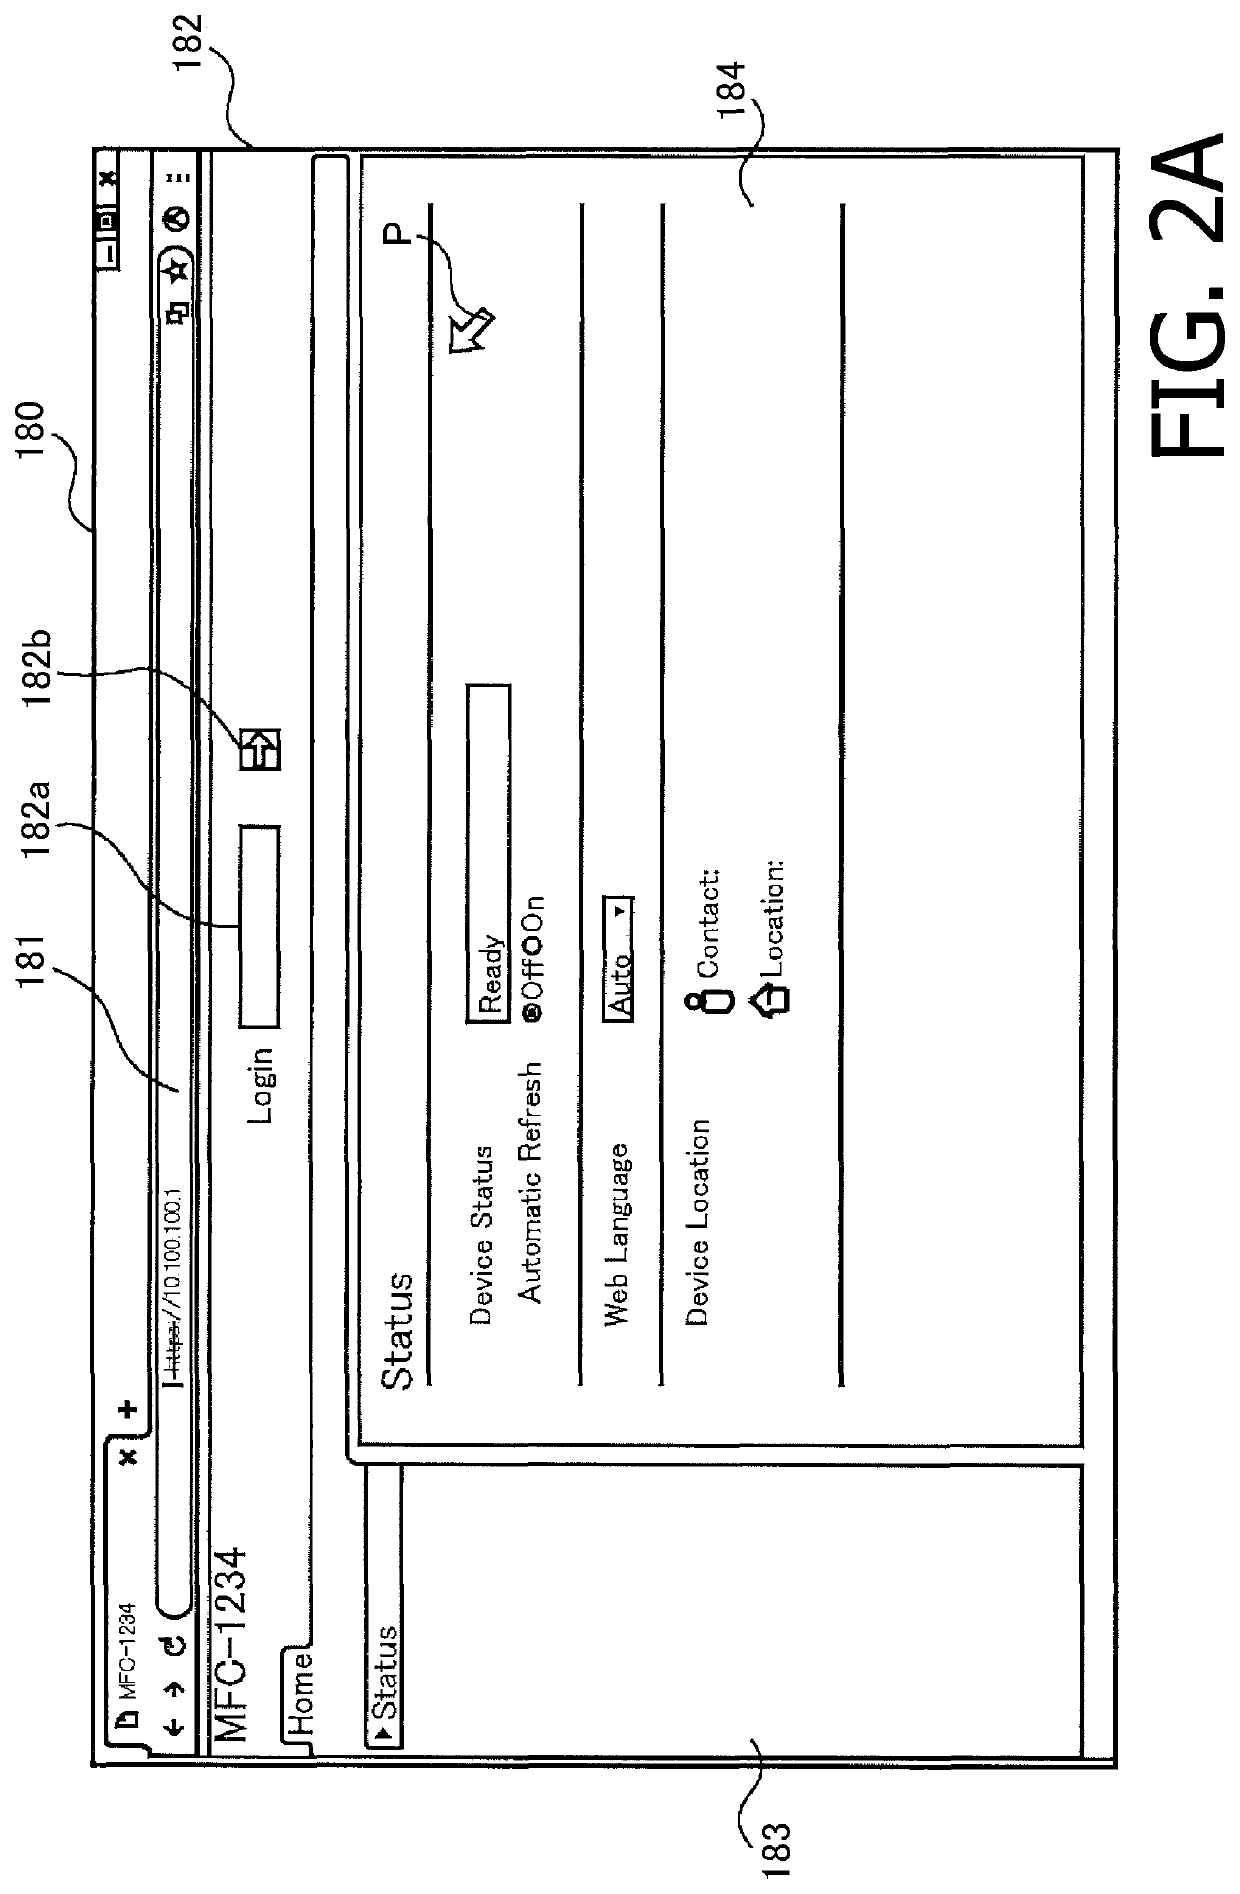 Image forming apparatus, method, and computer-readable medium for reducing processing load to display animation during remote control